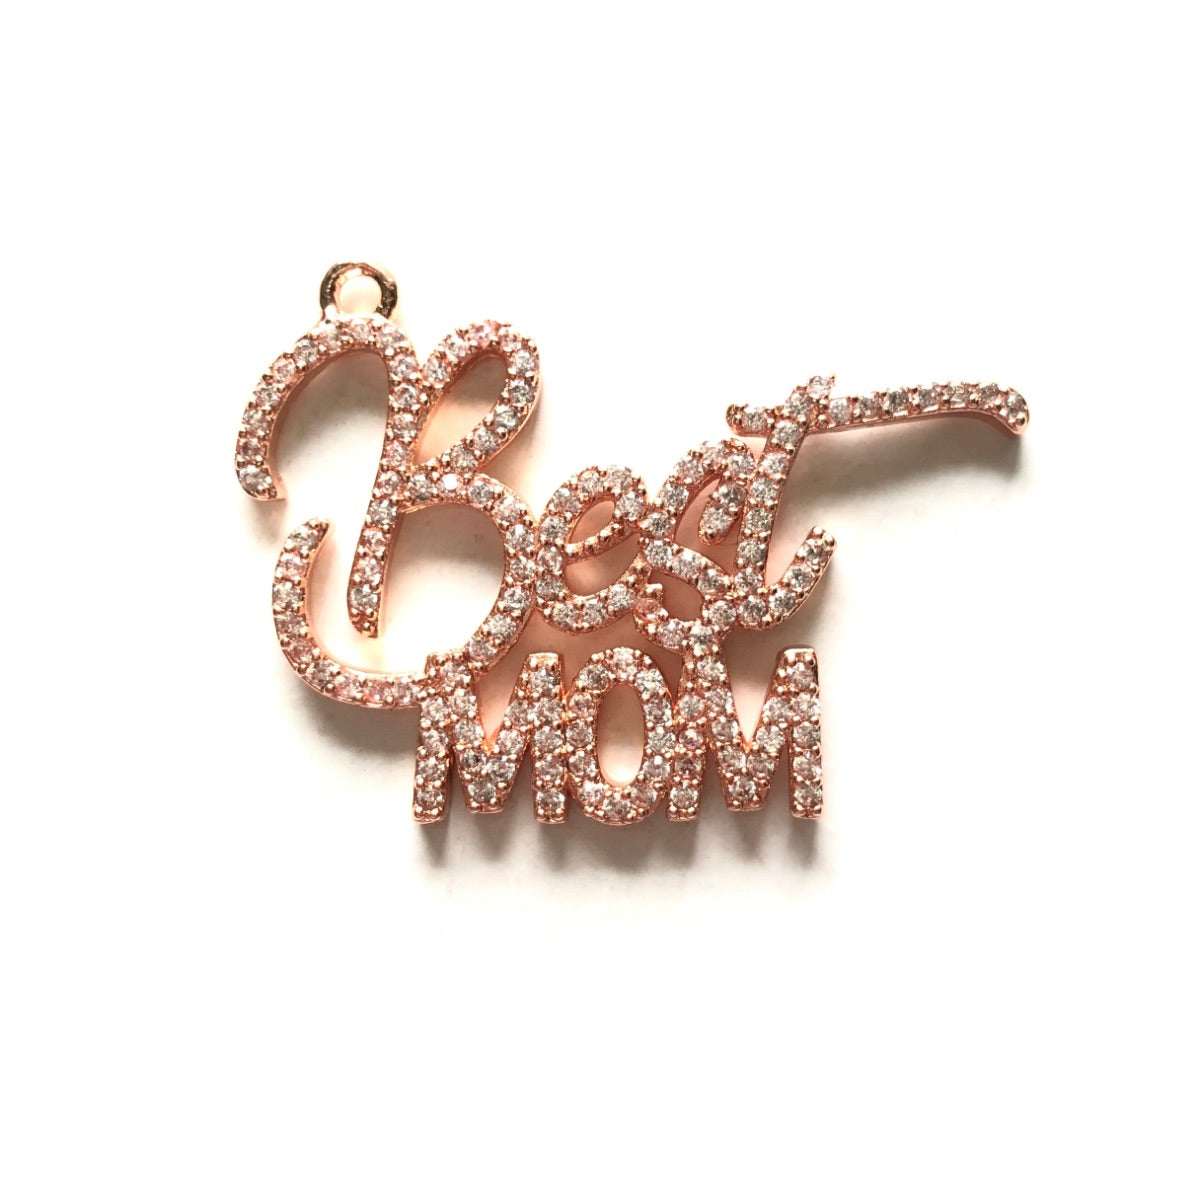 10pcs/lot 35*25.5mm CZ Pave Best Mom Charms for Mother's Day Rose Gold CZ Paved Charms Mother's Day Words & Quotes Charms Beads Beyond